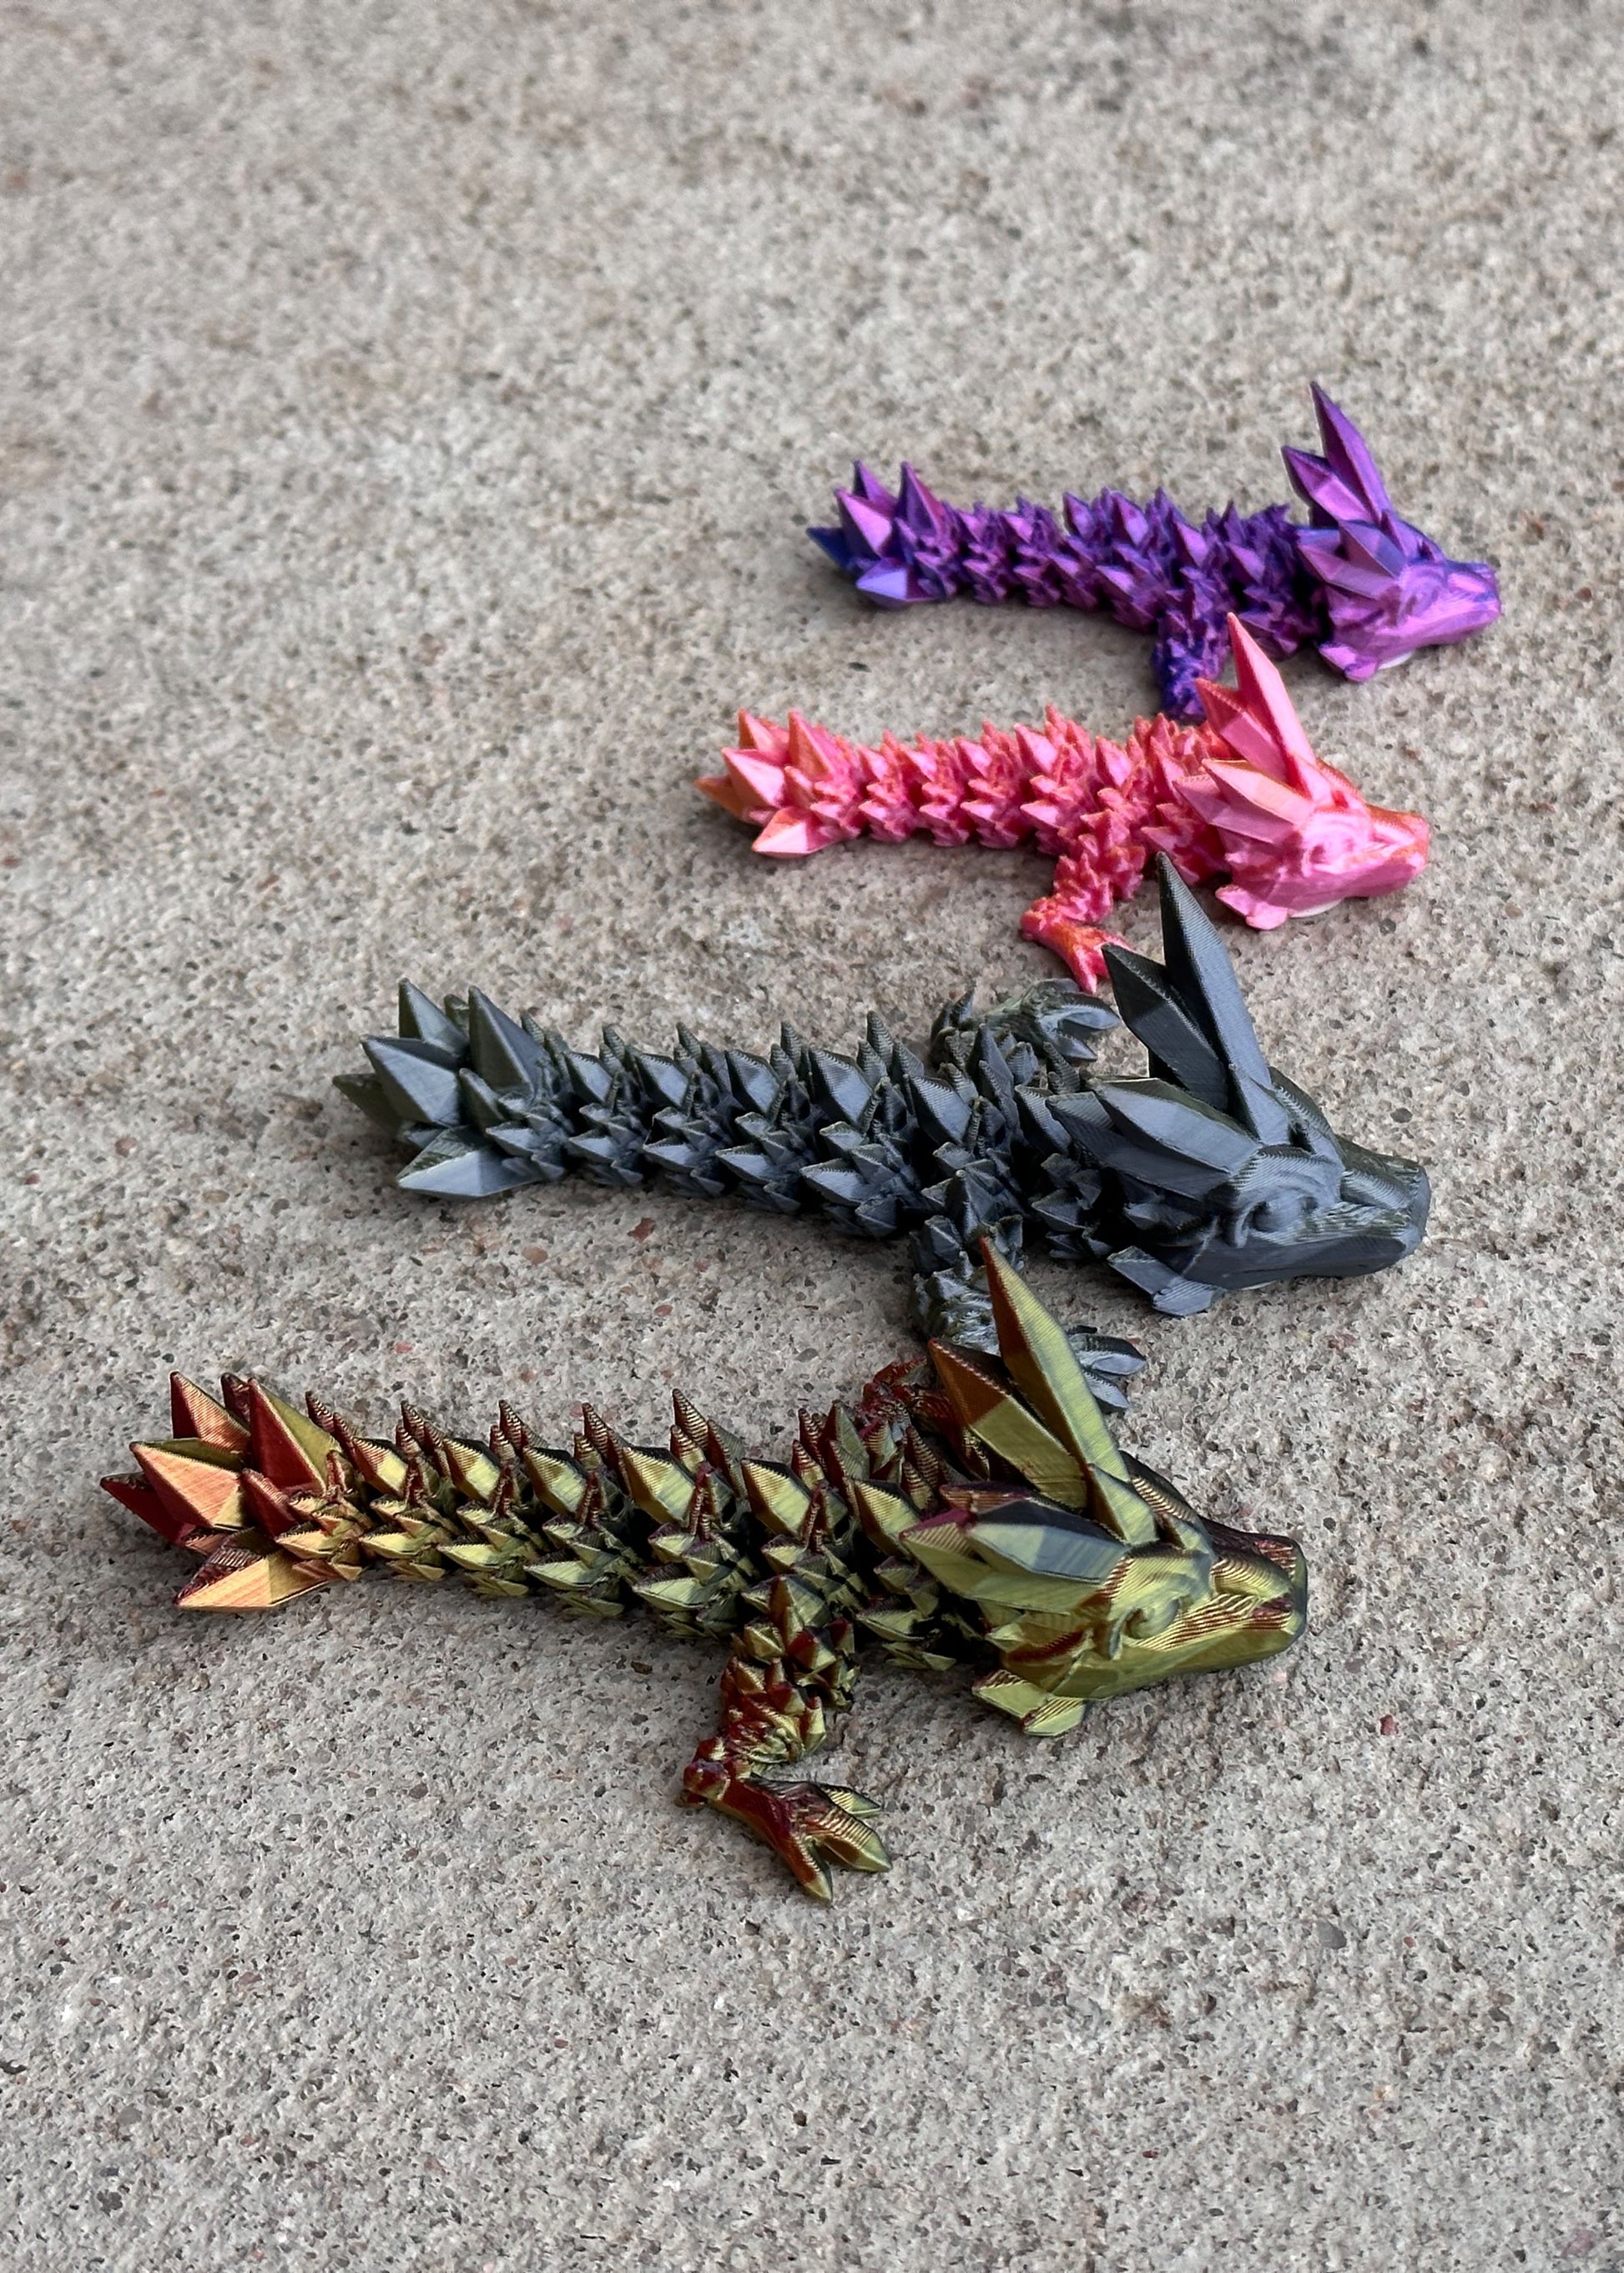 3D Printed Flexi Cinderwing3D Articulated Large Crystal Wing Dragon Rainbow